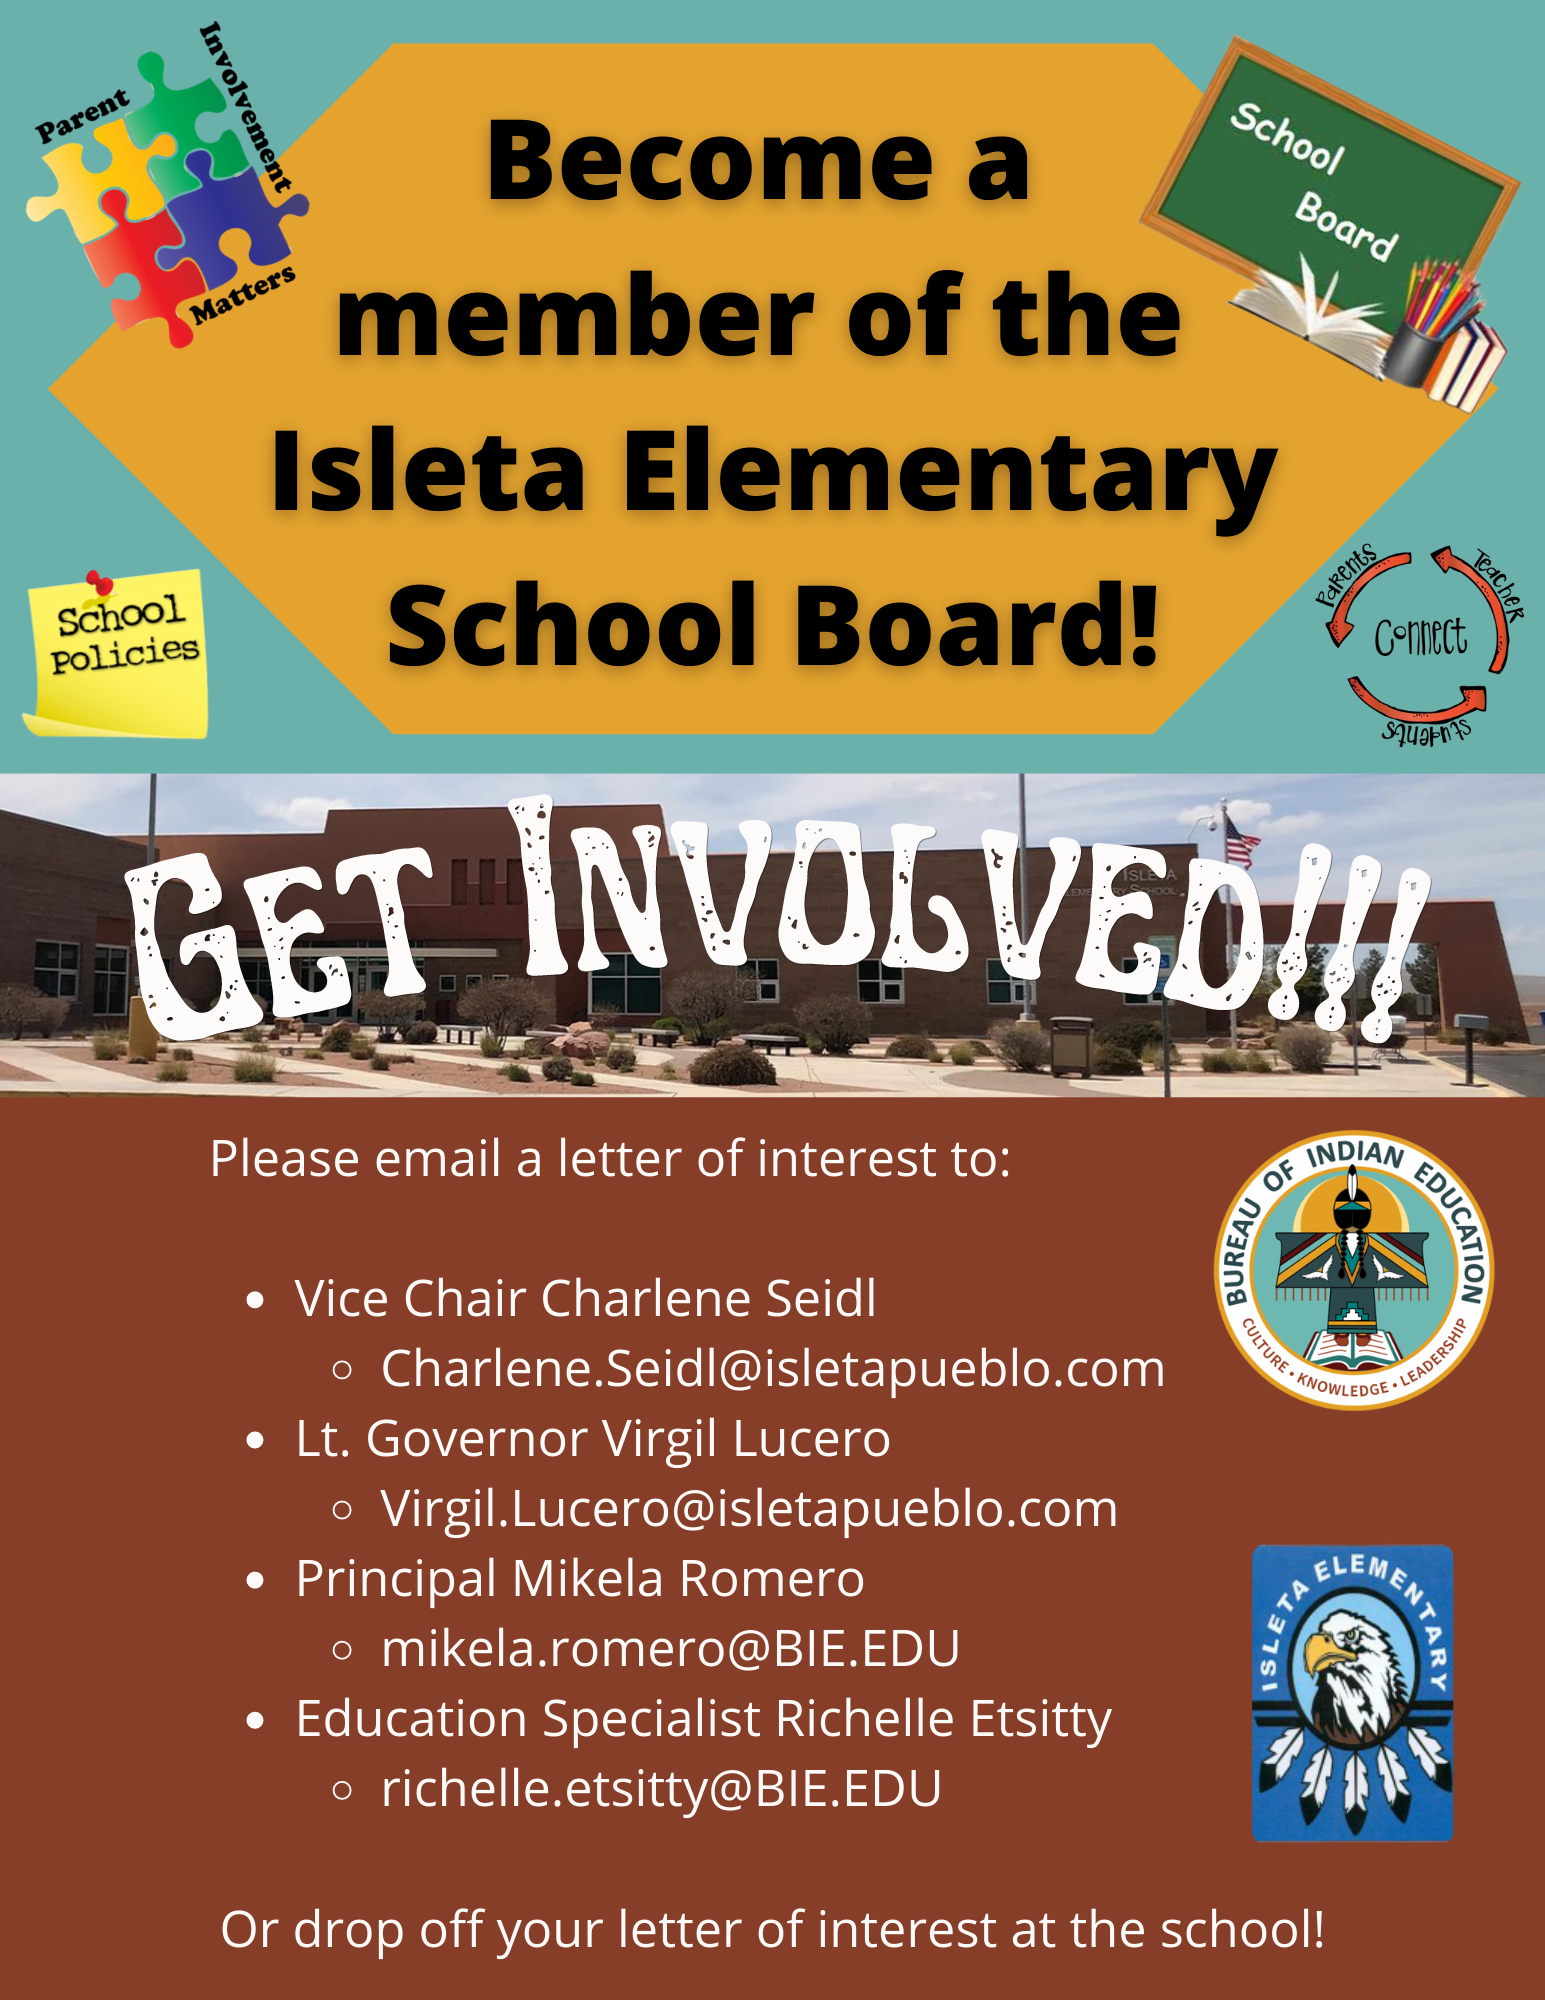 IES is recruiting for its school board